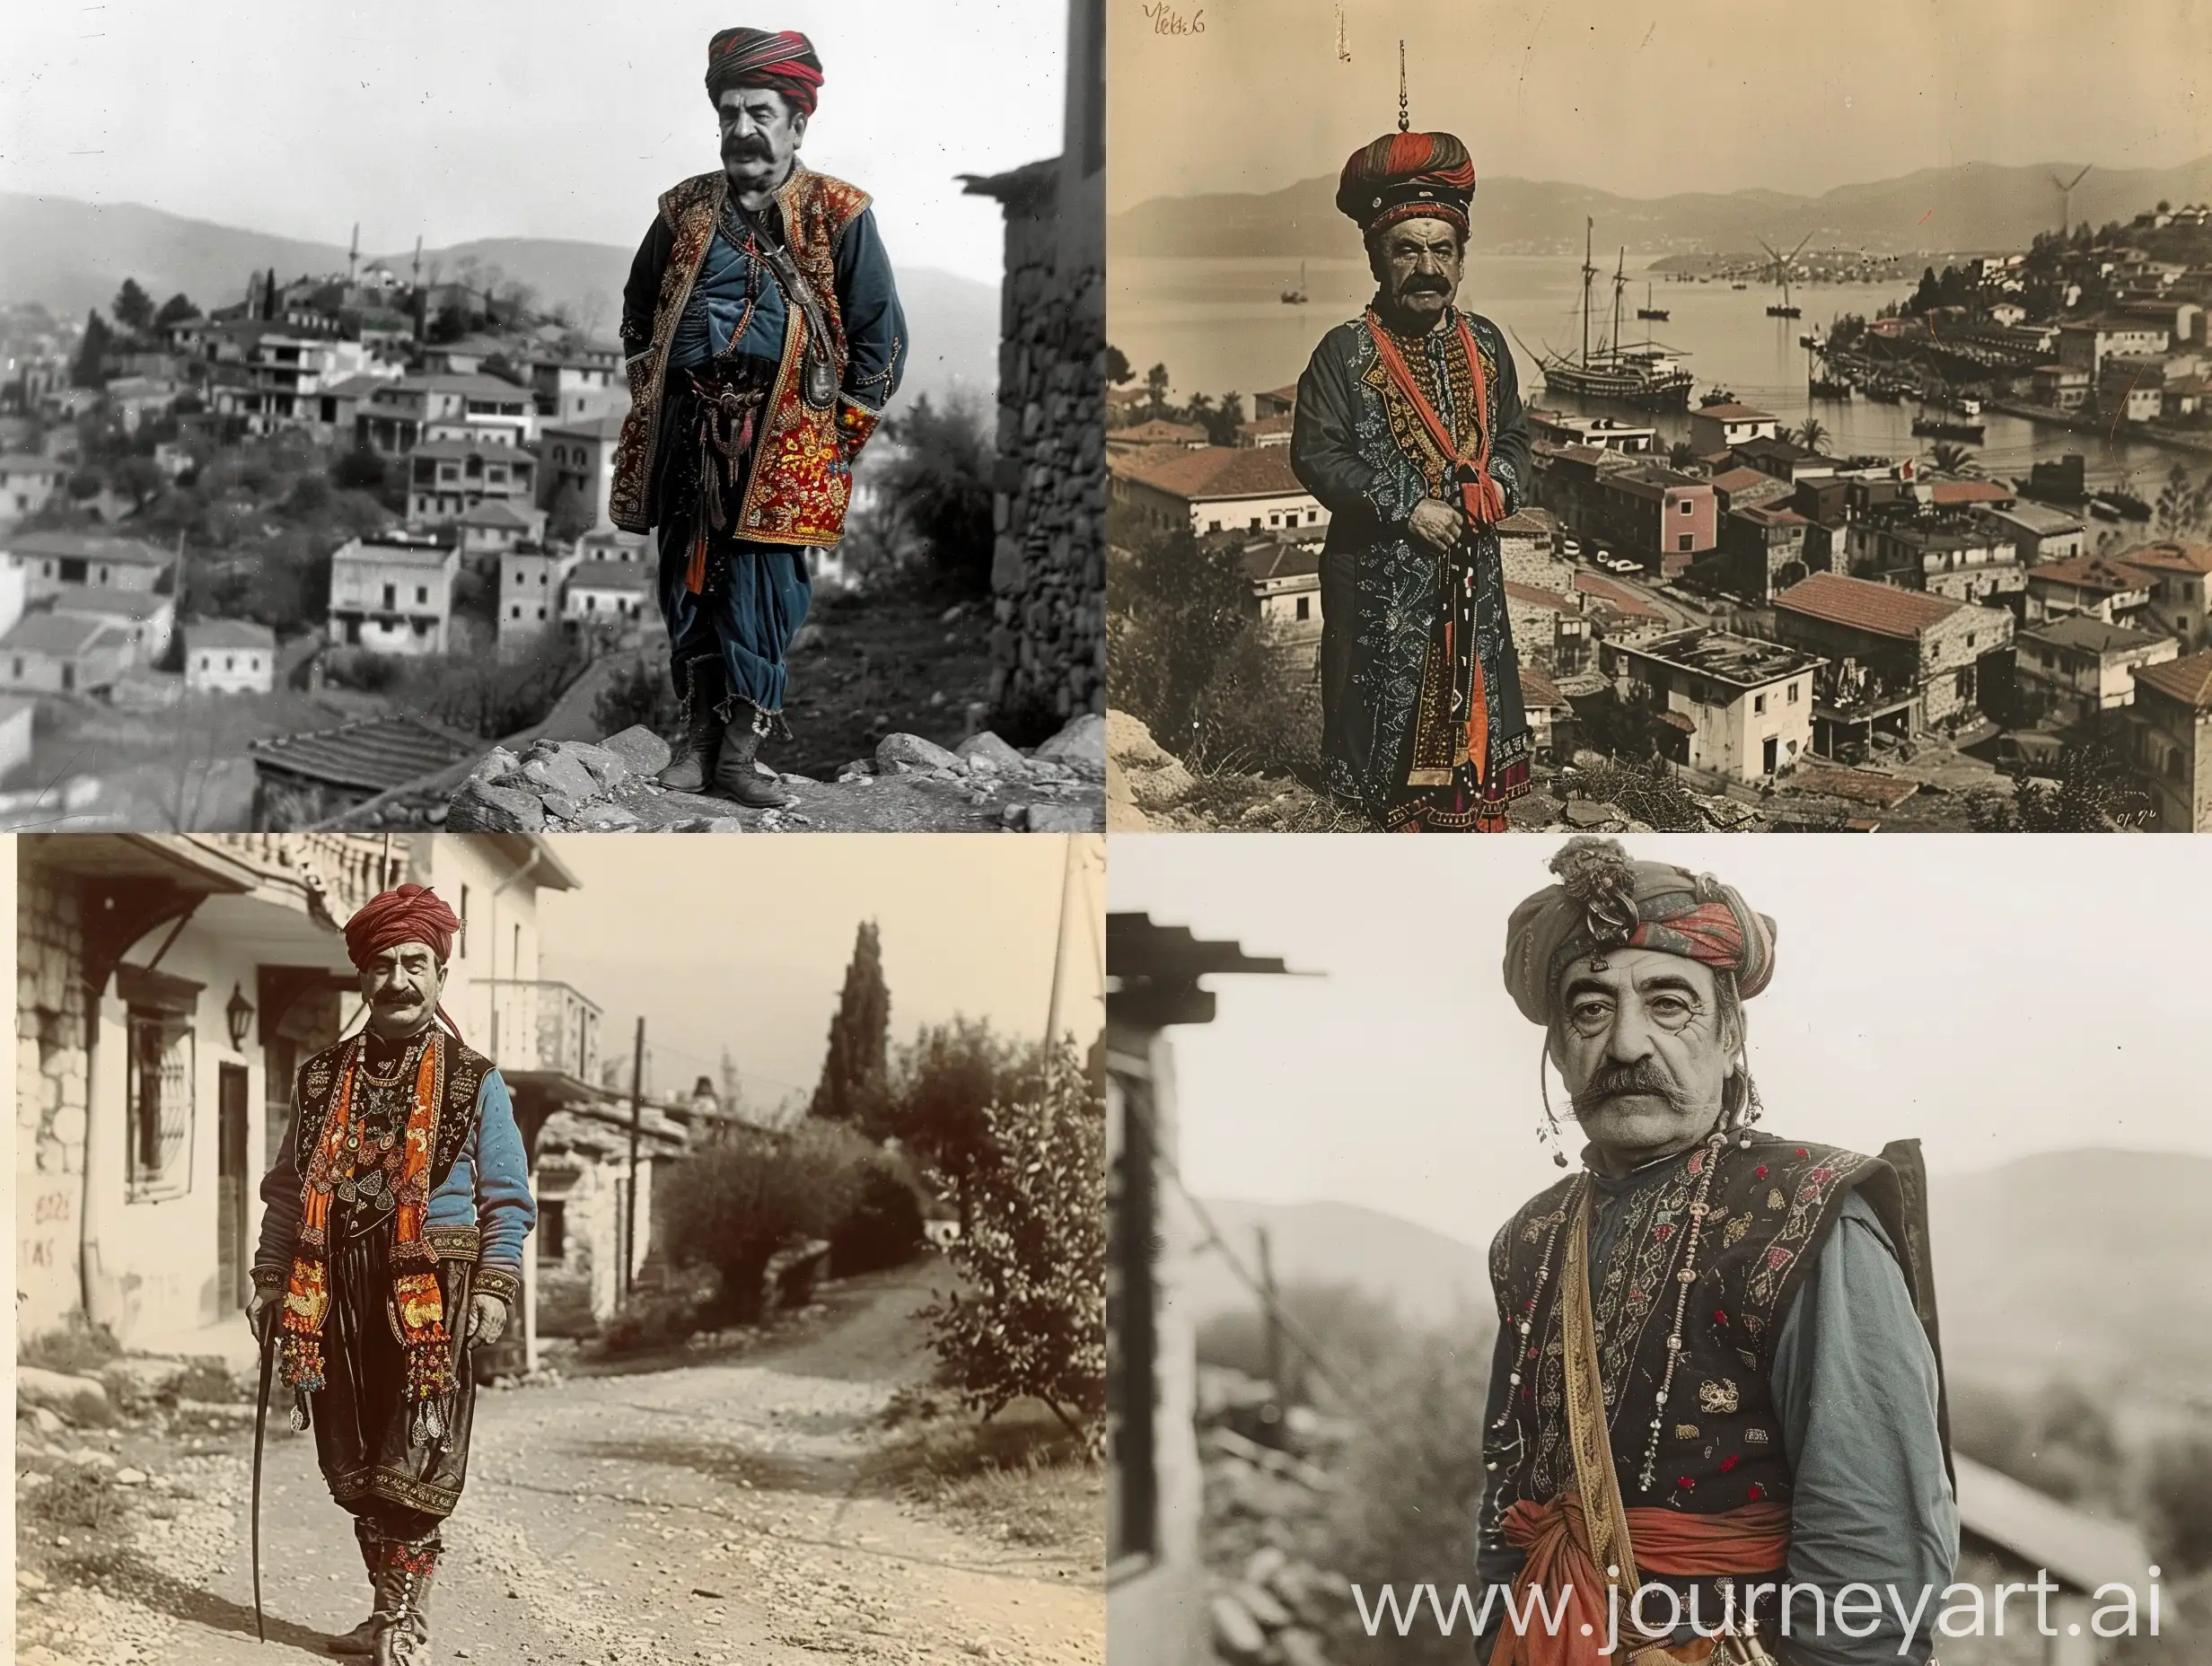 After the end of the Turkish War of Independence, Yörük Ali Efe settled in Izmir to make a new start. After the difficult years of the war, he intended to live a quiet life in this city. However, after his years in Izmir, in 1928, he decided to move to Yenipazar, which he had used as his headquarters for a while during the War of Independence. This decision was related to his desire to keep the memories of the war years and the spirit of struggle alive. Yenipazar was not only a headquarters for him, but also a place of peace and spiritual significance.